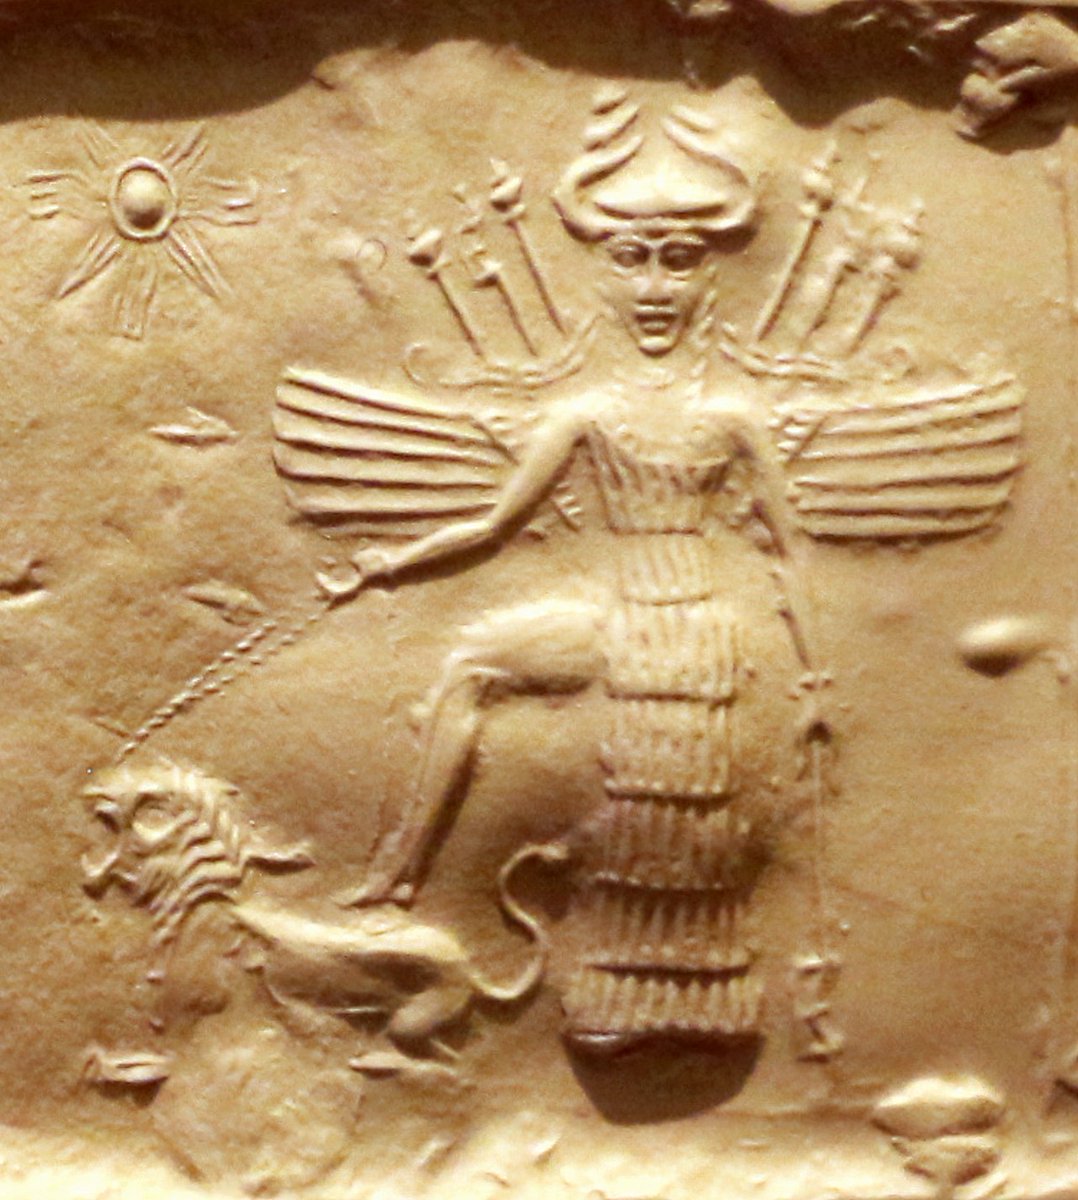 Ishtar (the warrior goddess) who likes posing standing on a lion...The "mysterious" morning star...Guess who rises with the sun, pretending to be "The morning star" in Leo? Sirius...A very special star indeed...The lioness...Who kills the boy with the golden hair...